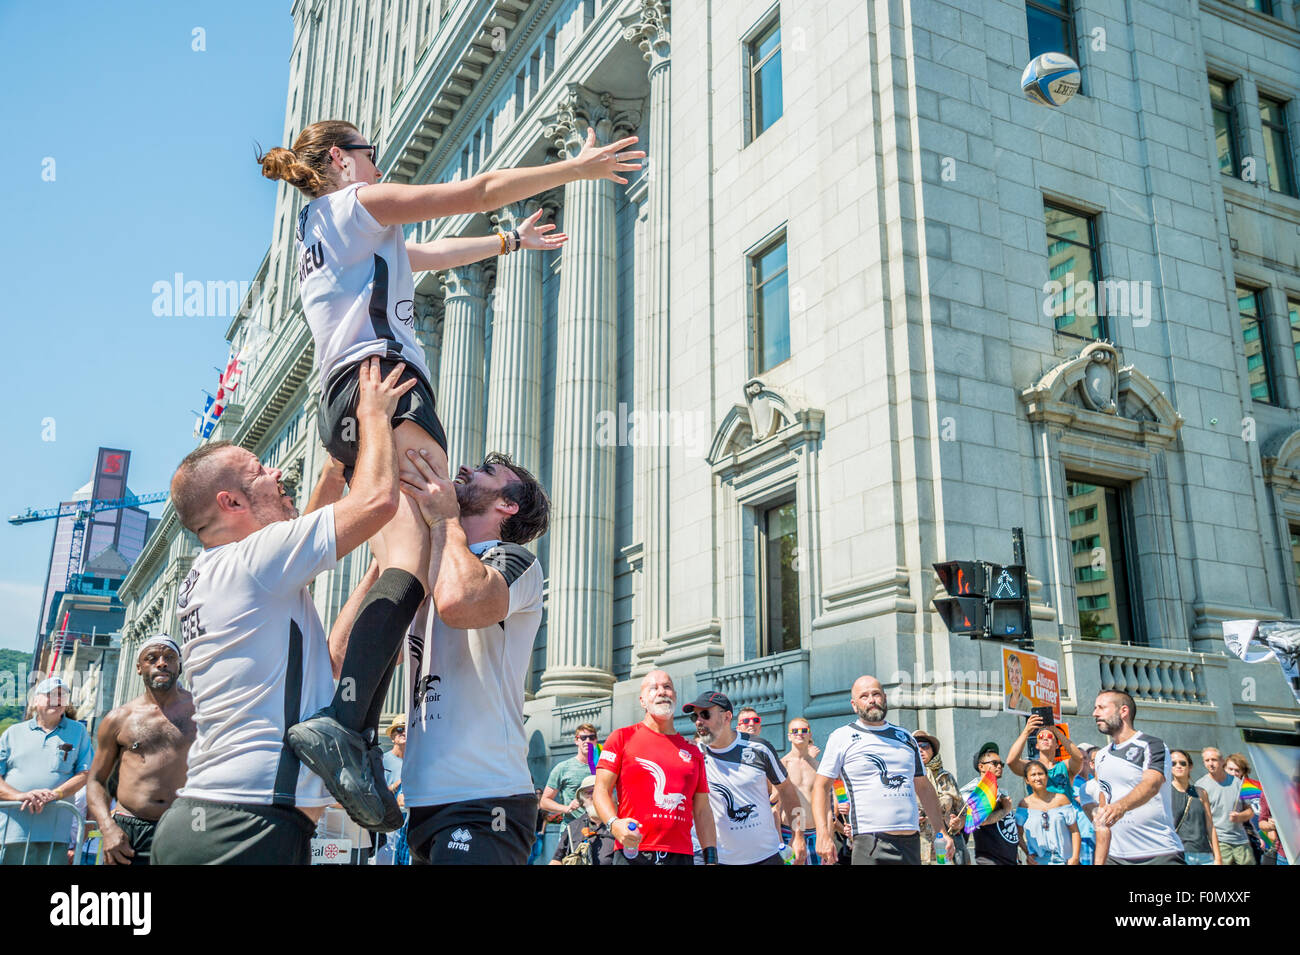 MONTREAL, CANADA, 16th August 2015. A female member of the gay rugby team is catching the ball at the 2015 Gay Pride Parade in Montreal. © Marc Bruxelle/Alamy Live News Stock Photo